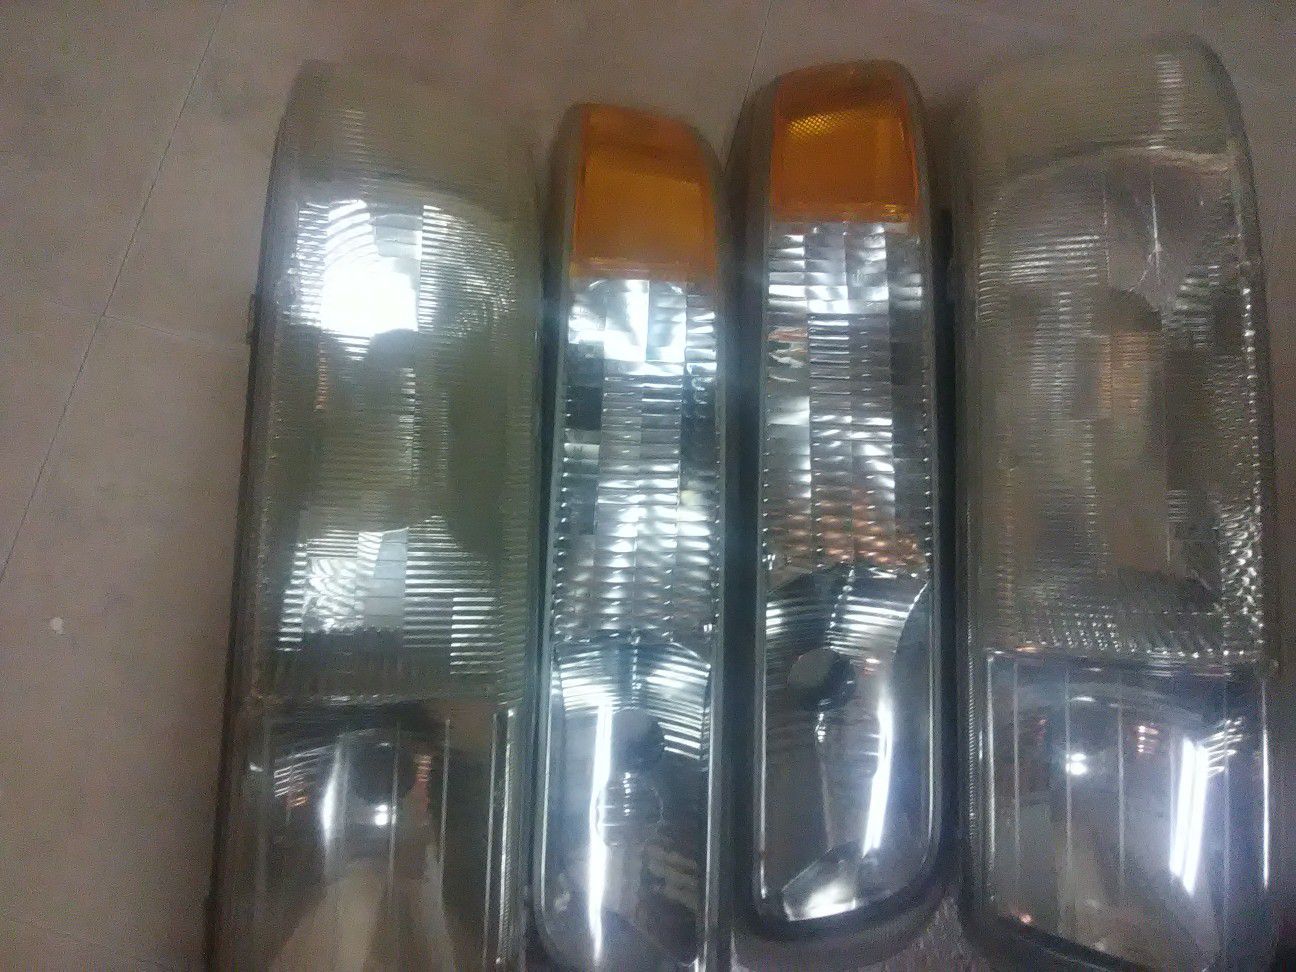 Factory headlight set from a Tahoe or Suburban from 01 to 05